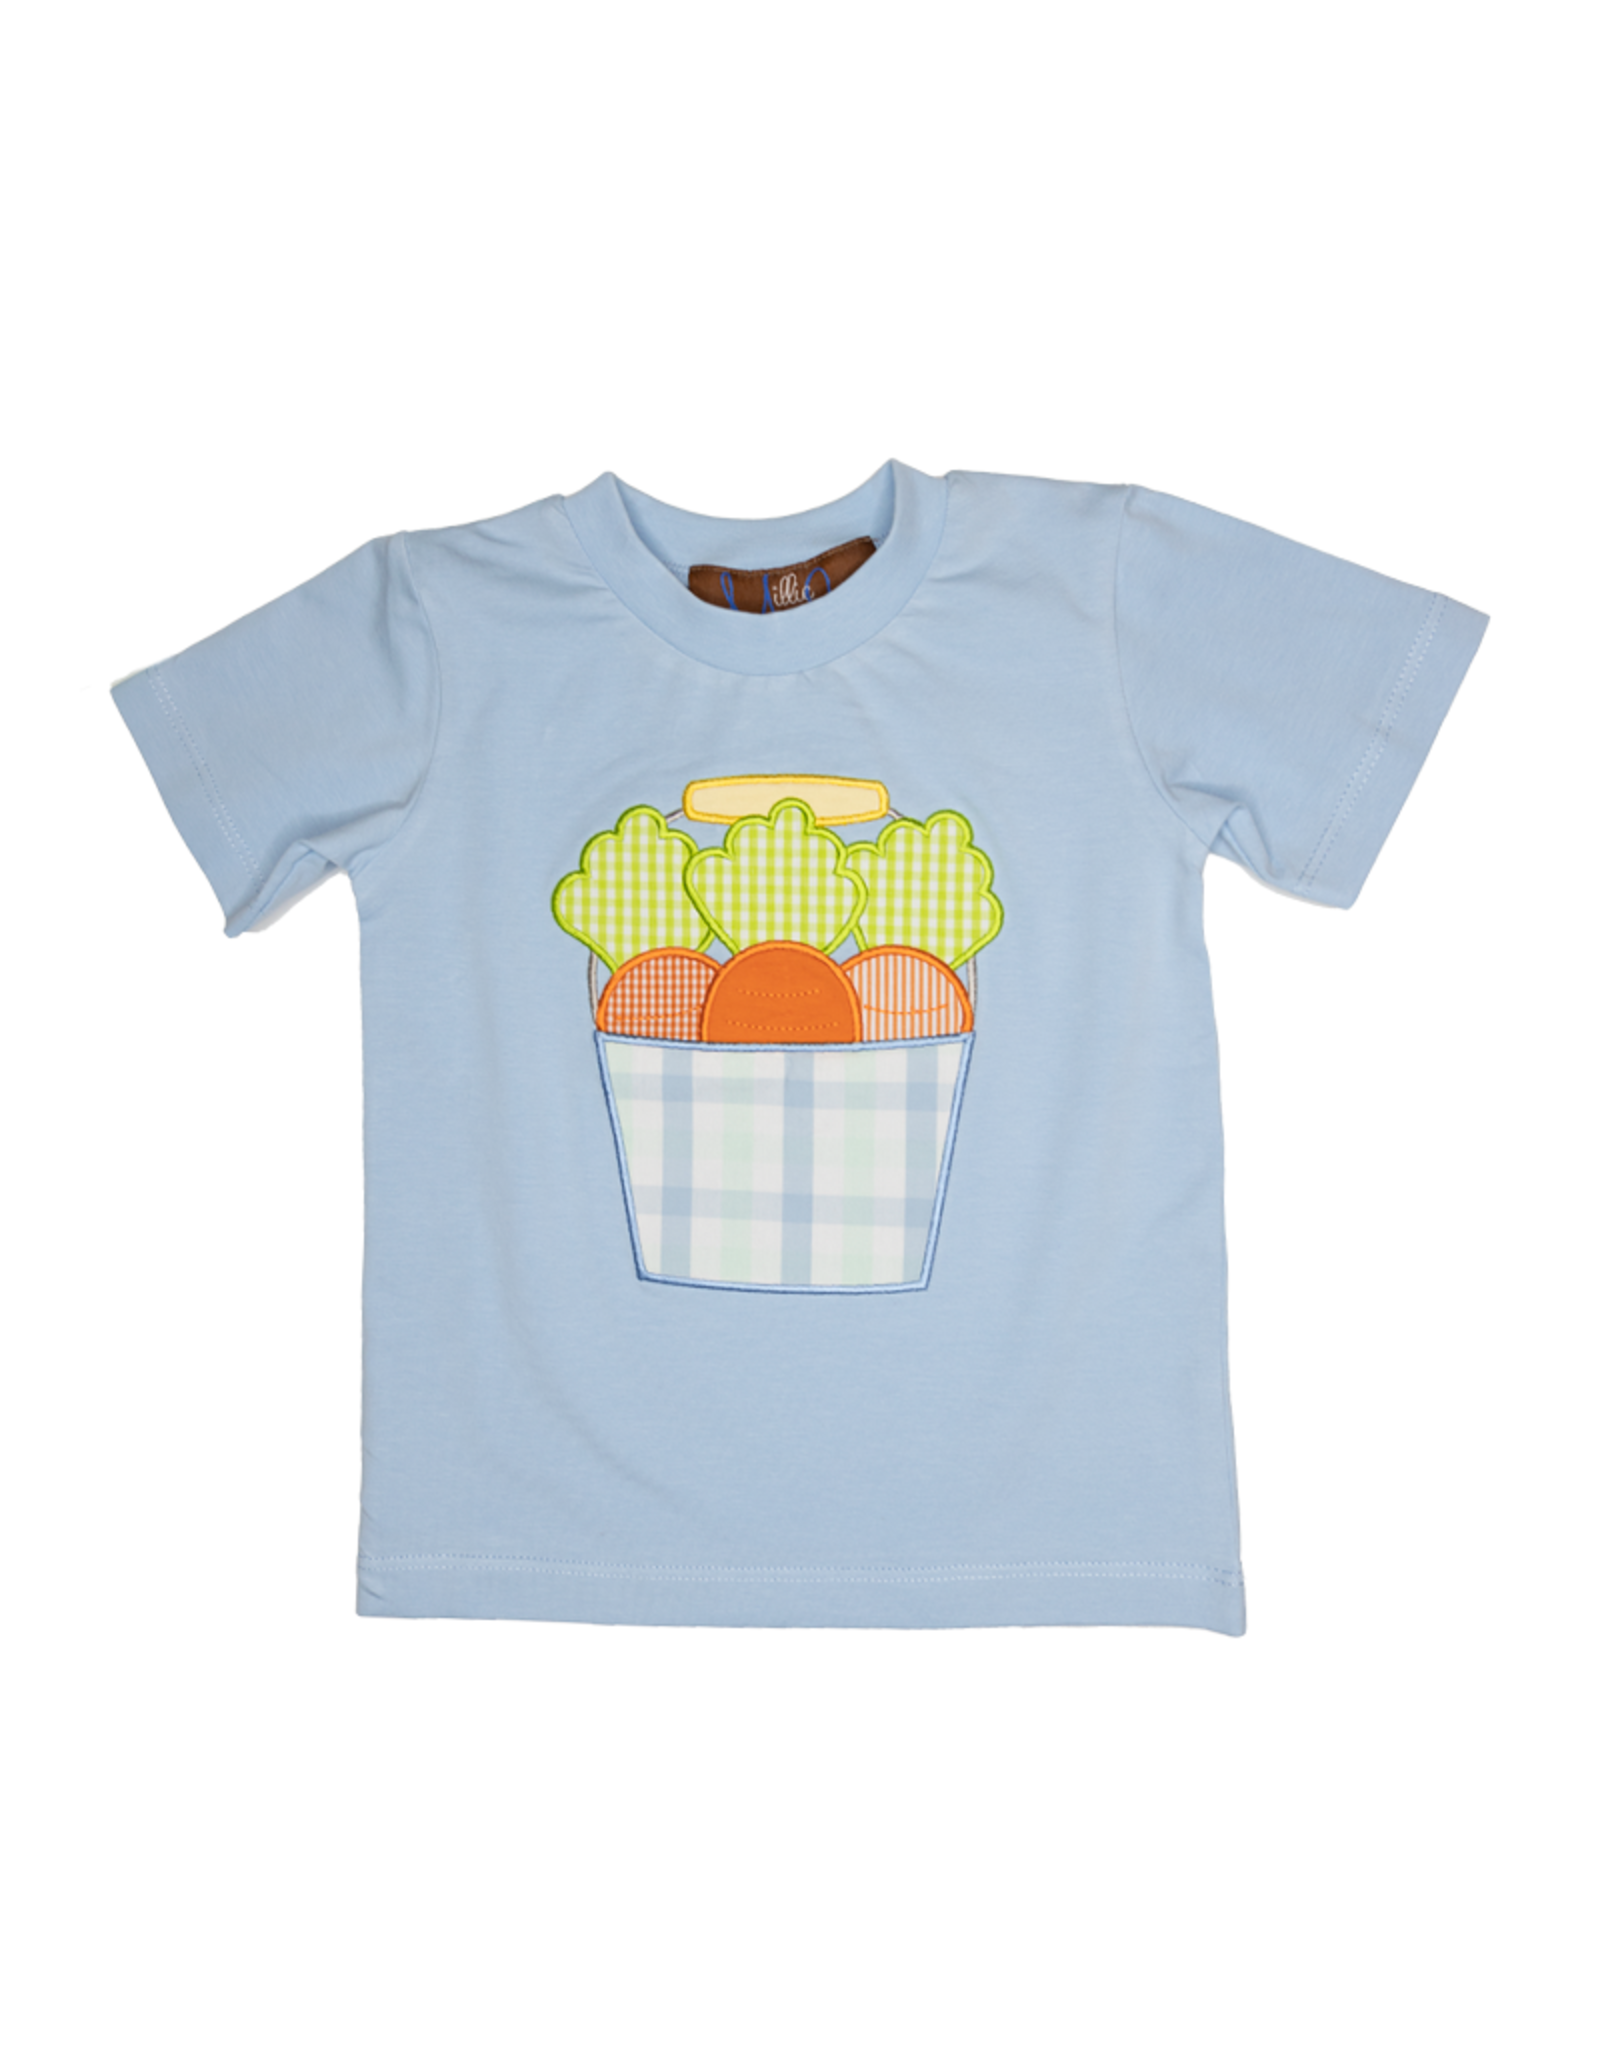 Millie Jay 509 Easter Pail Shirt